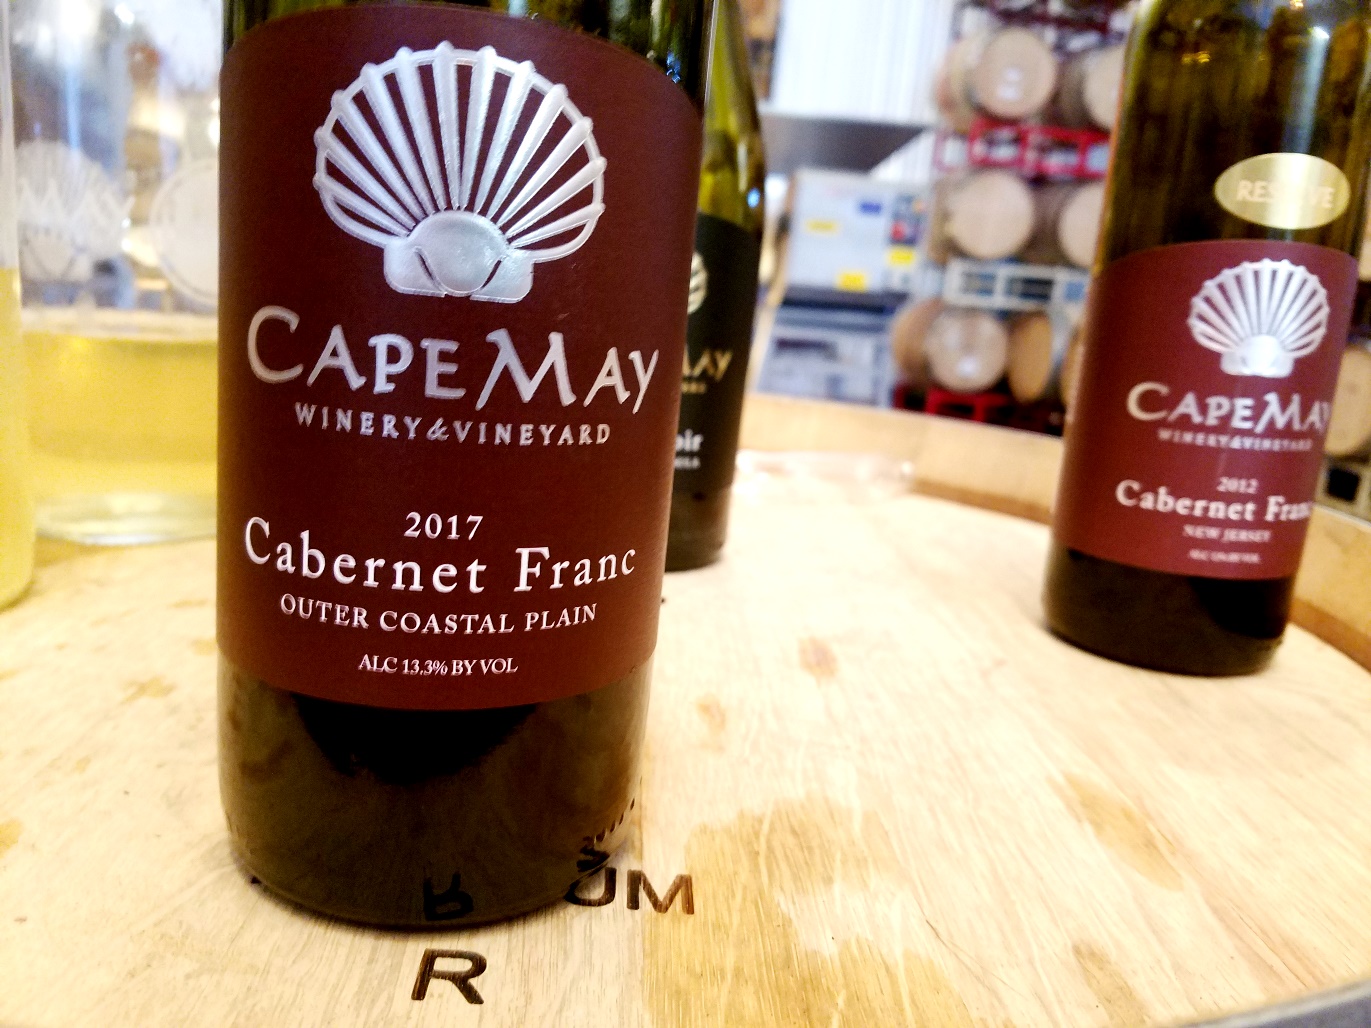 Cape May Winery & Vineyard, Cabernet Franc 2017, Outer Coastal Plan, New Jersey, Wine Casual